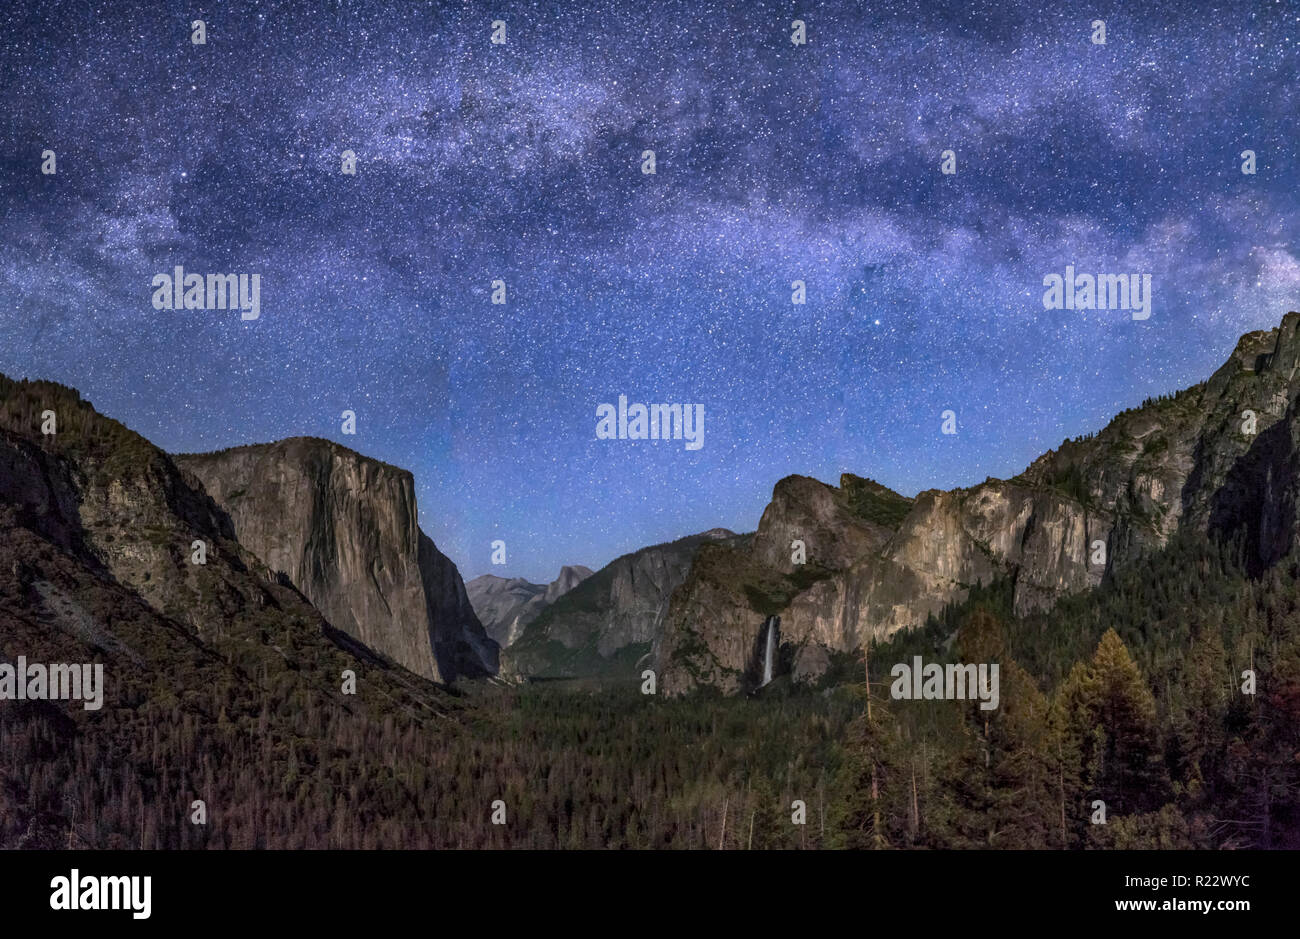 Yosemite Valley, from Tunnel View, is softly illuminated by the setting moon with the Milky Way above. Stock Photo